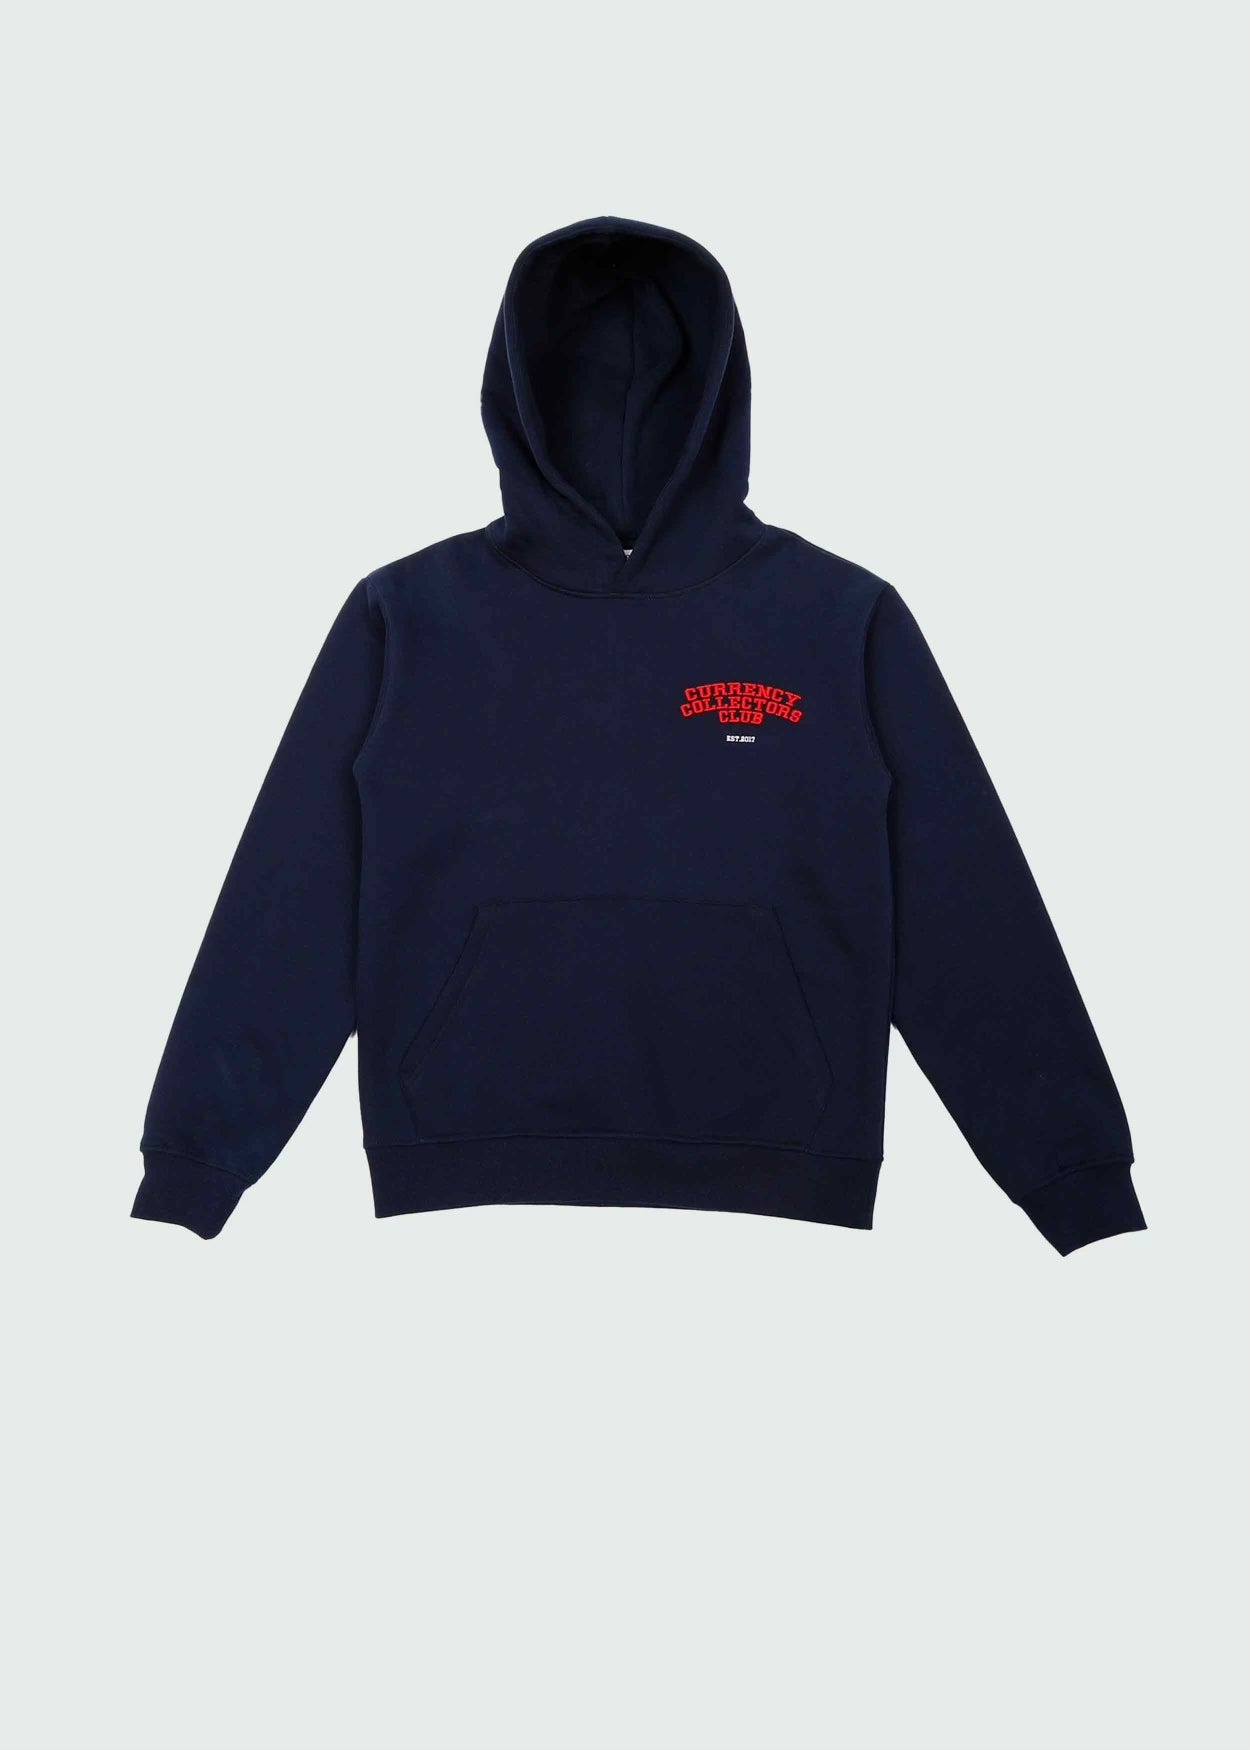 Navy Currency Collector Club Hoodie in